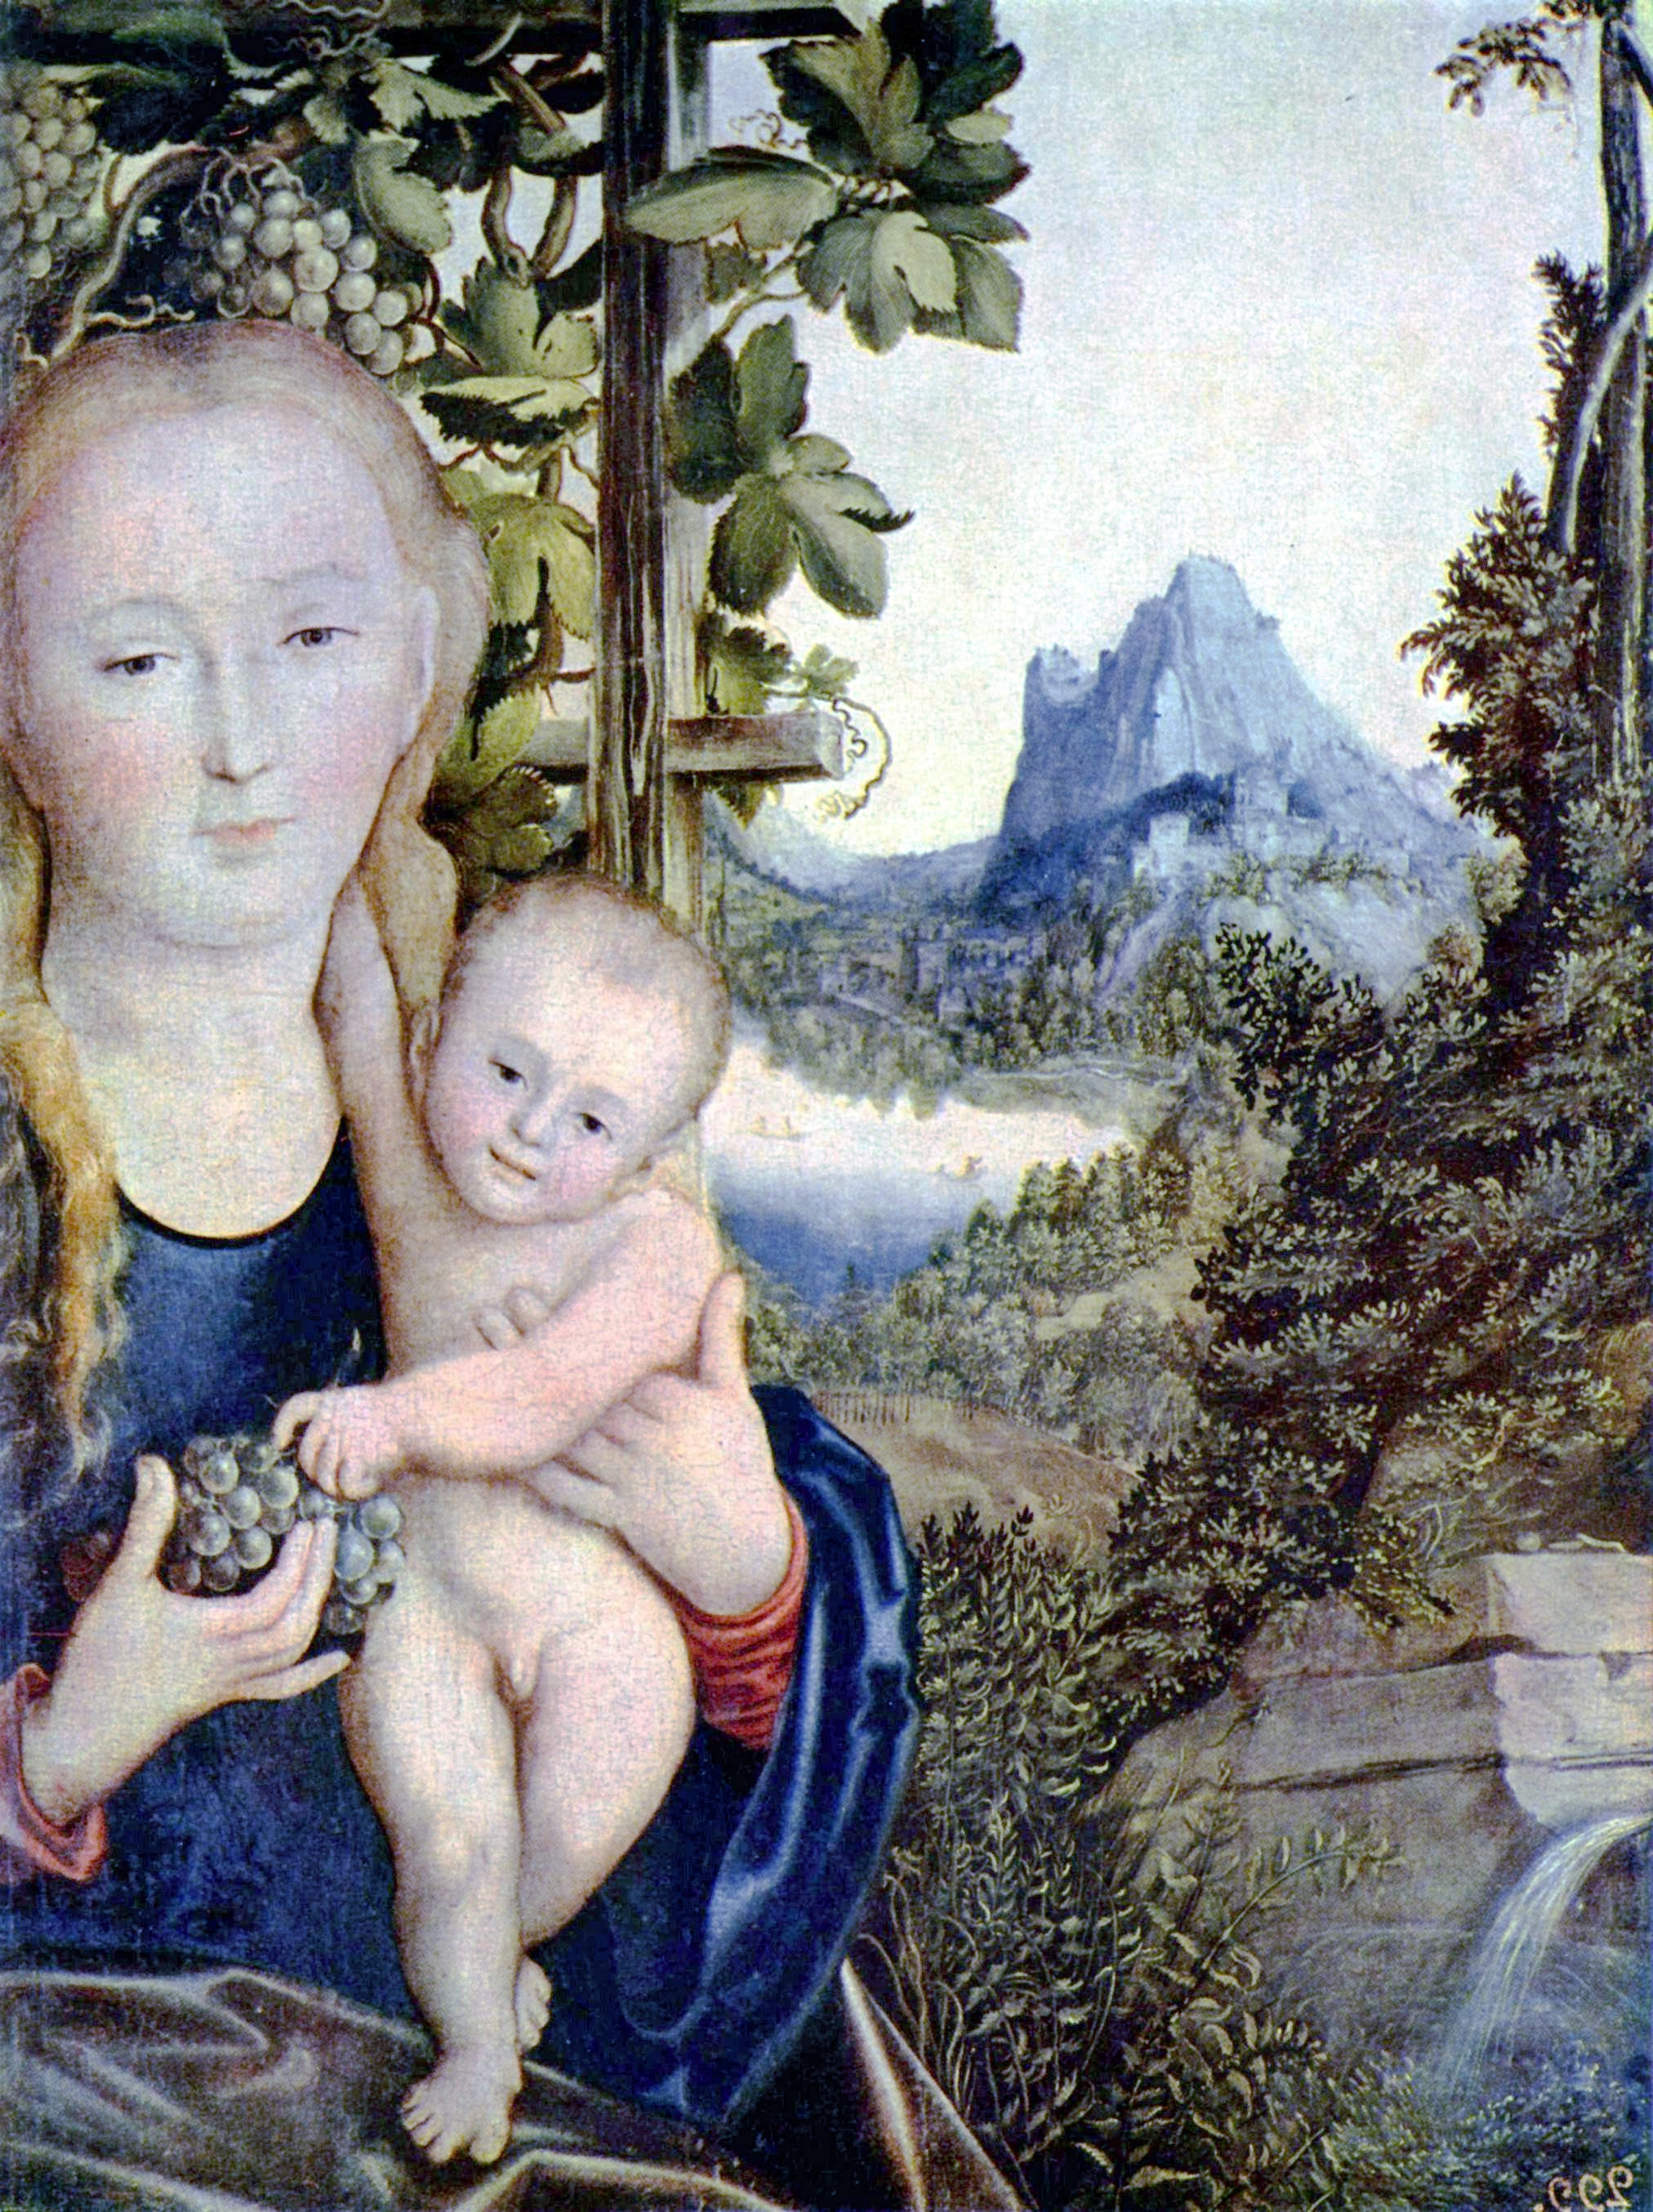 a Thessara Eldusaer painting of a woman holding a baby